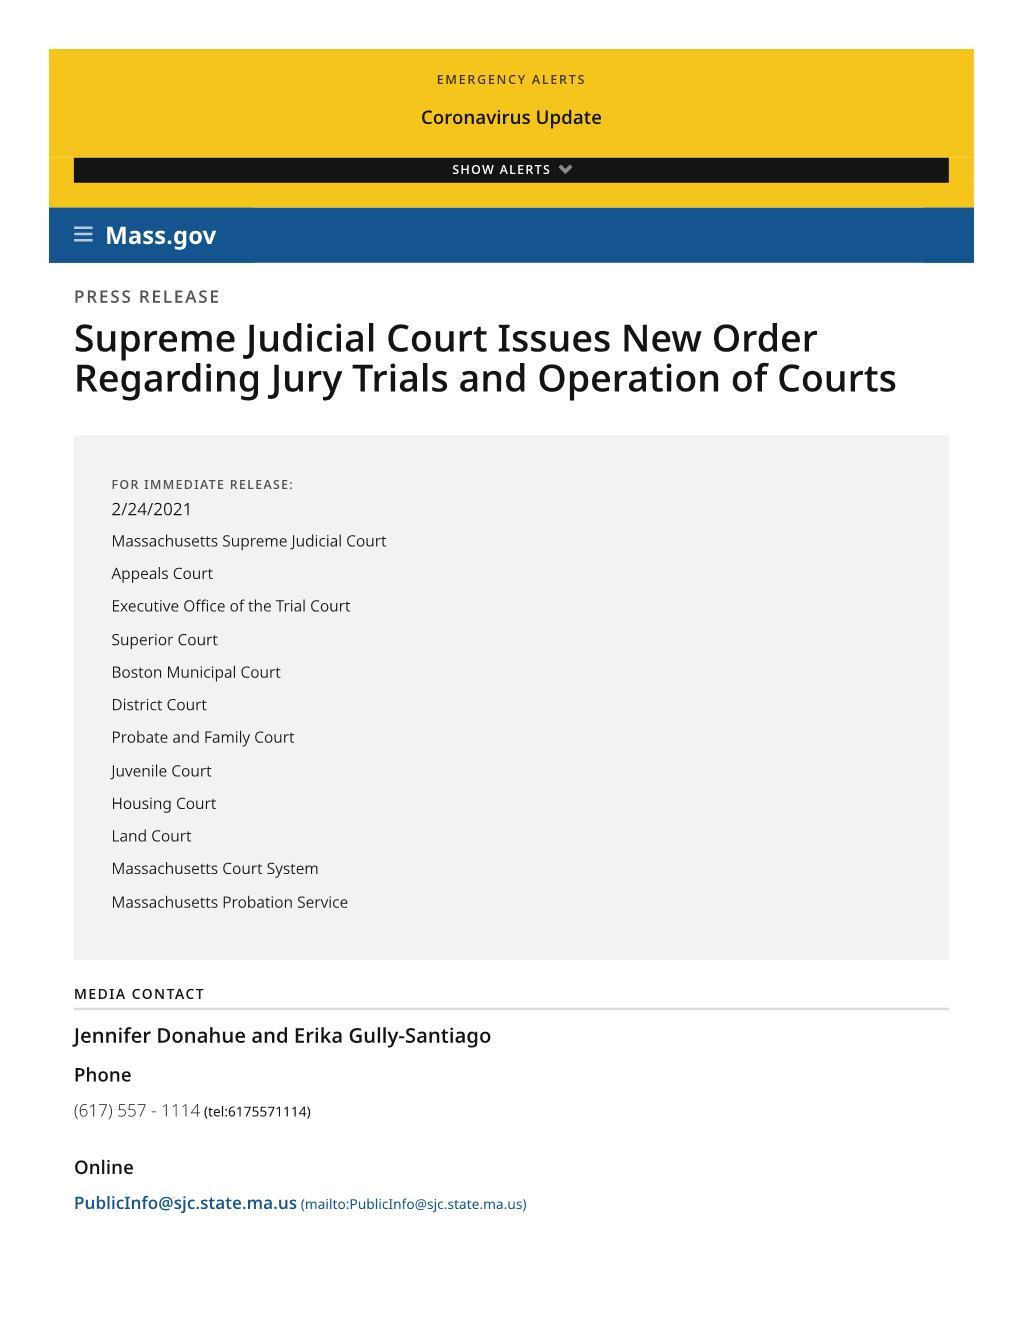 Supreme Judicial Court Issues New Order Regarding Jury Trials and Operation of Courts